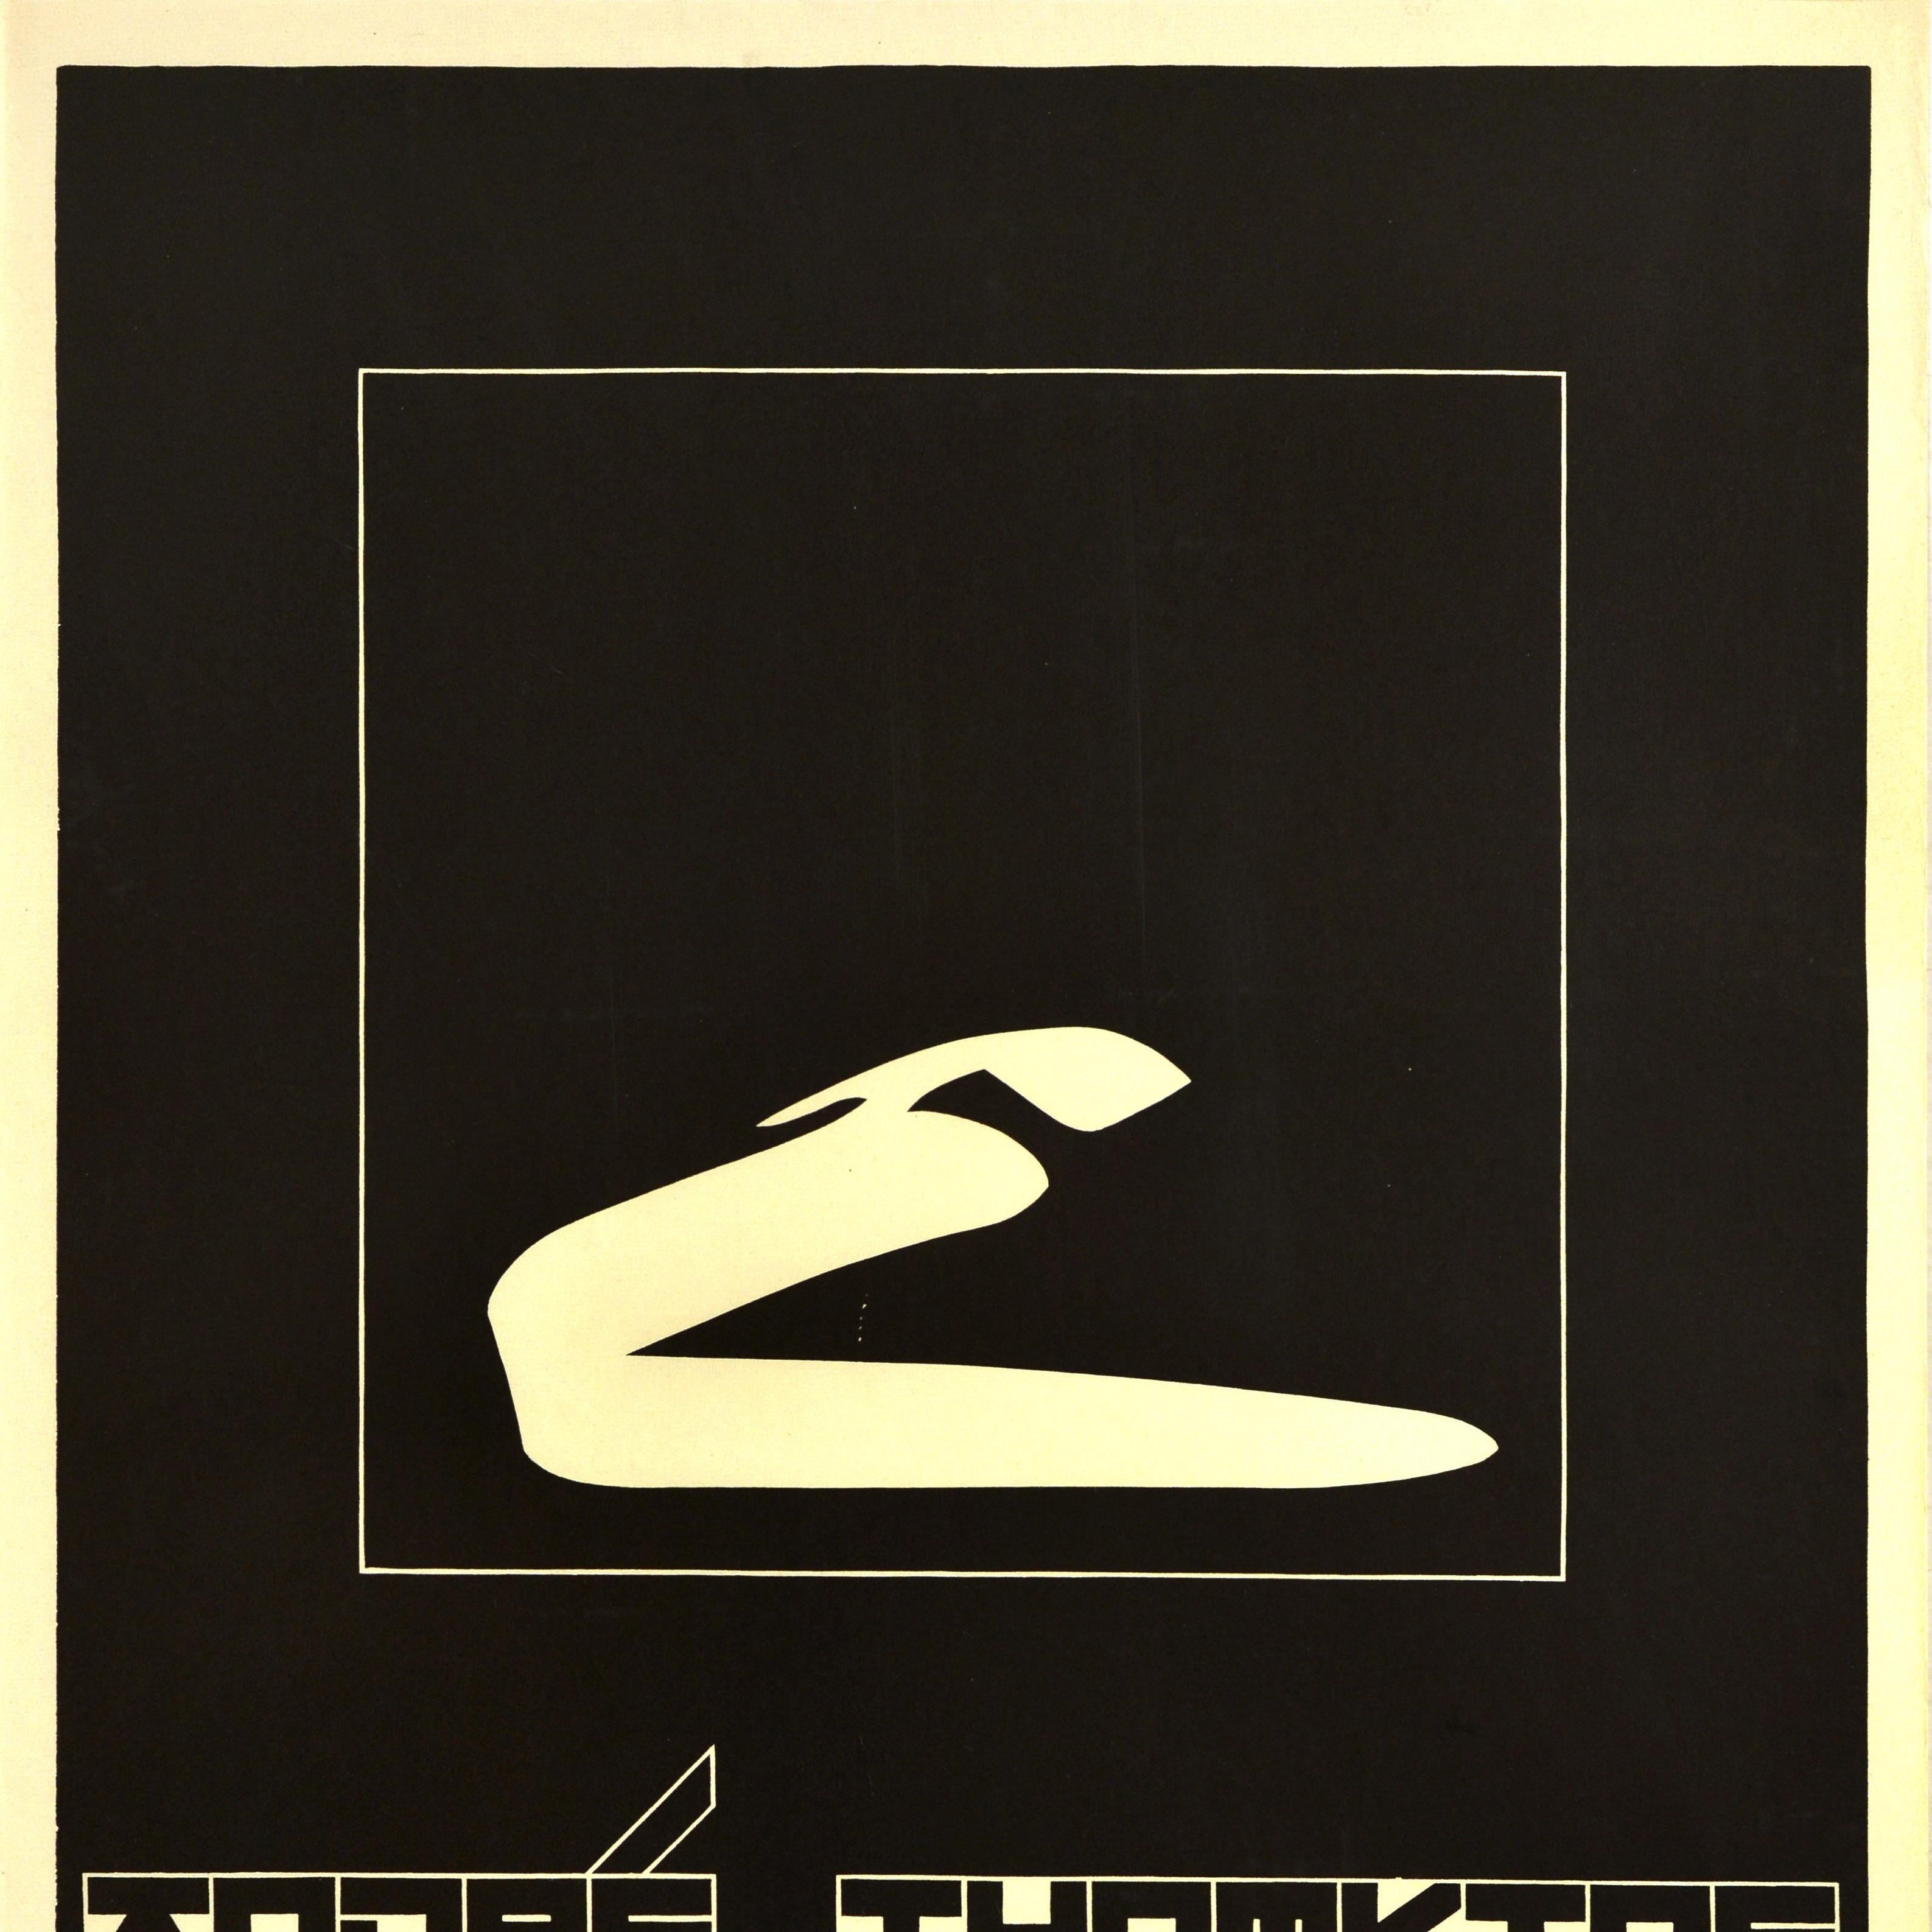 German Original Vintage Advertising Poster Andre Thomkins Pictures Exhibition Dadaism For Sale